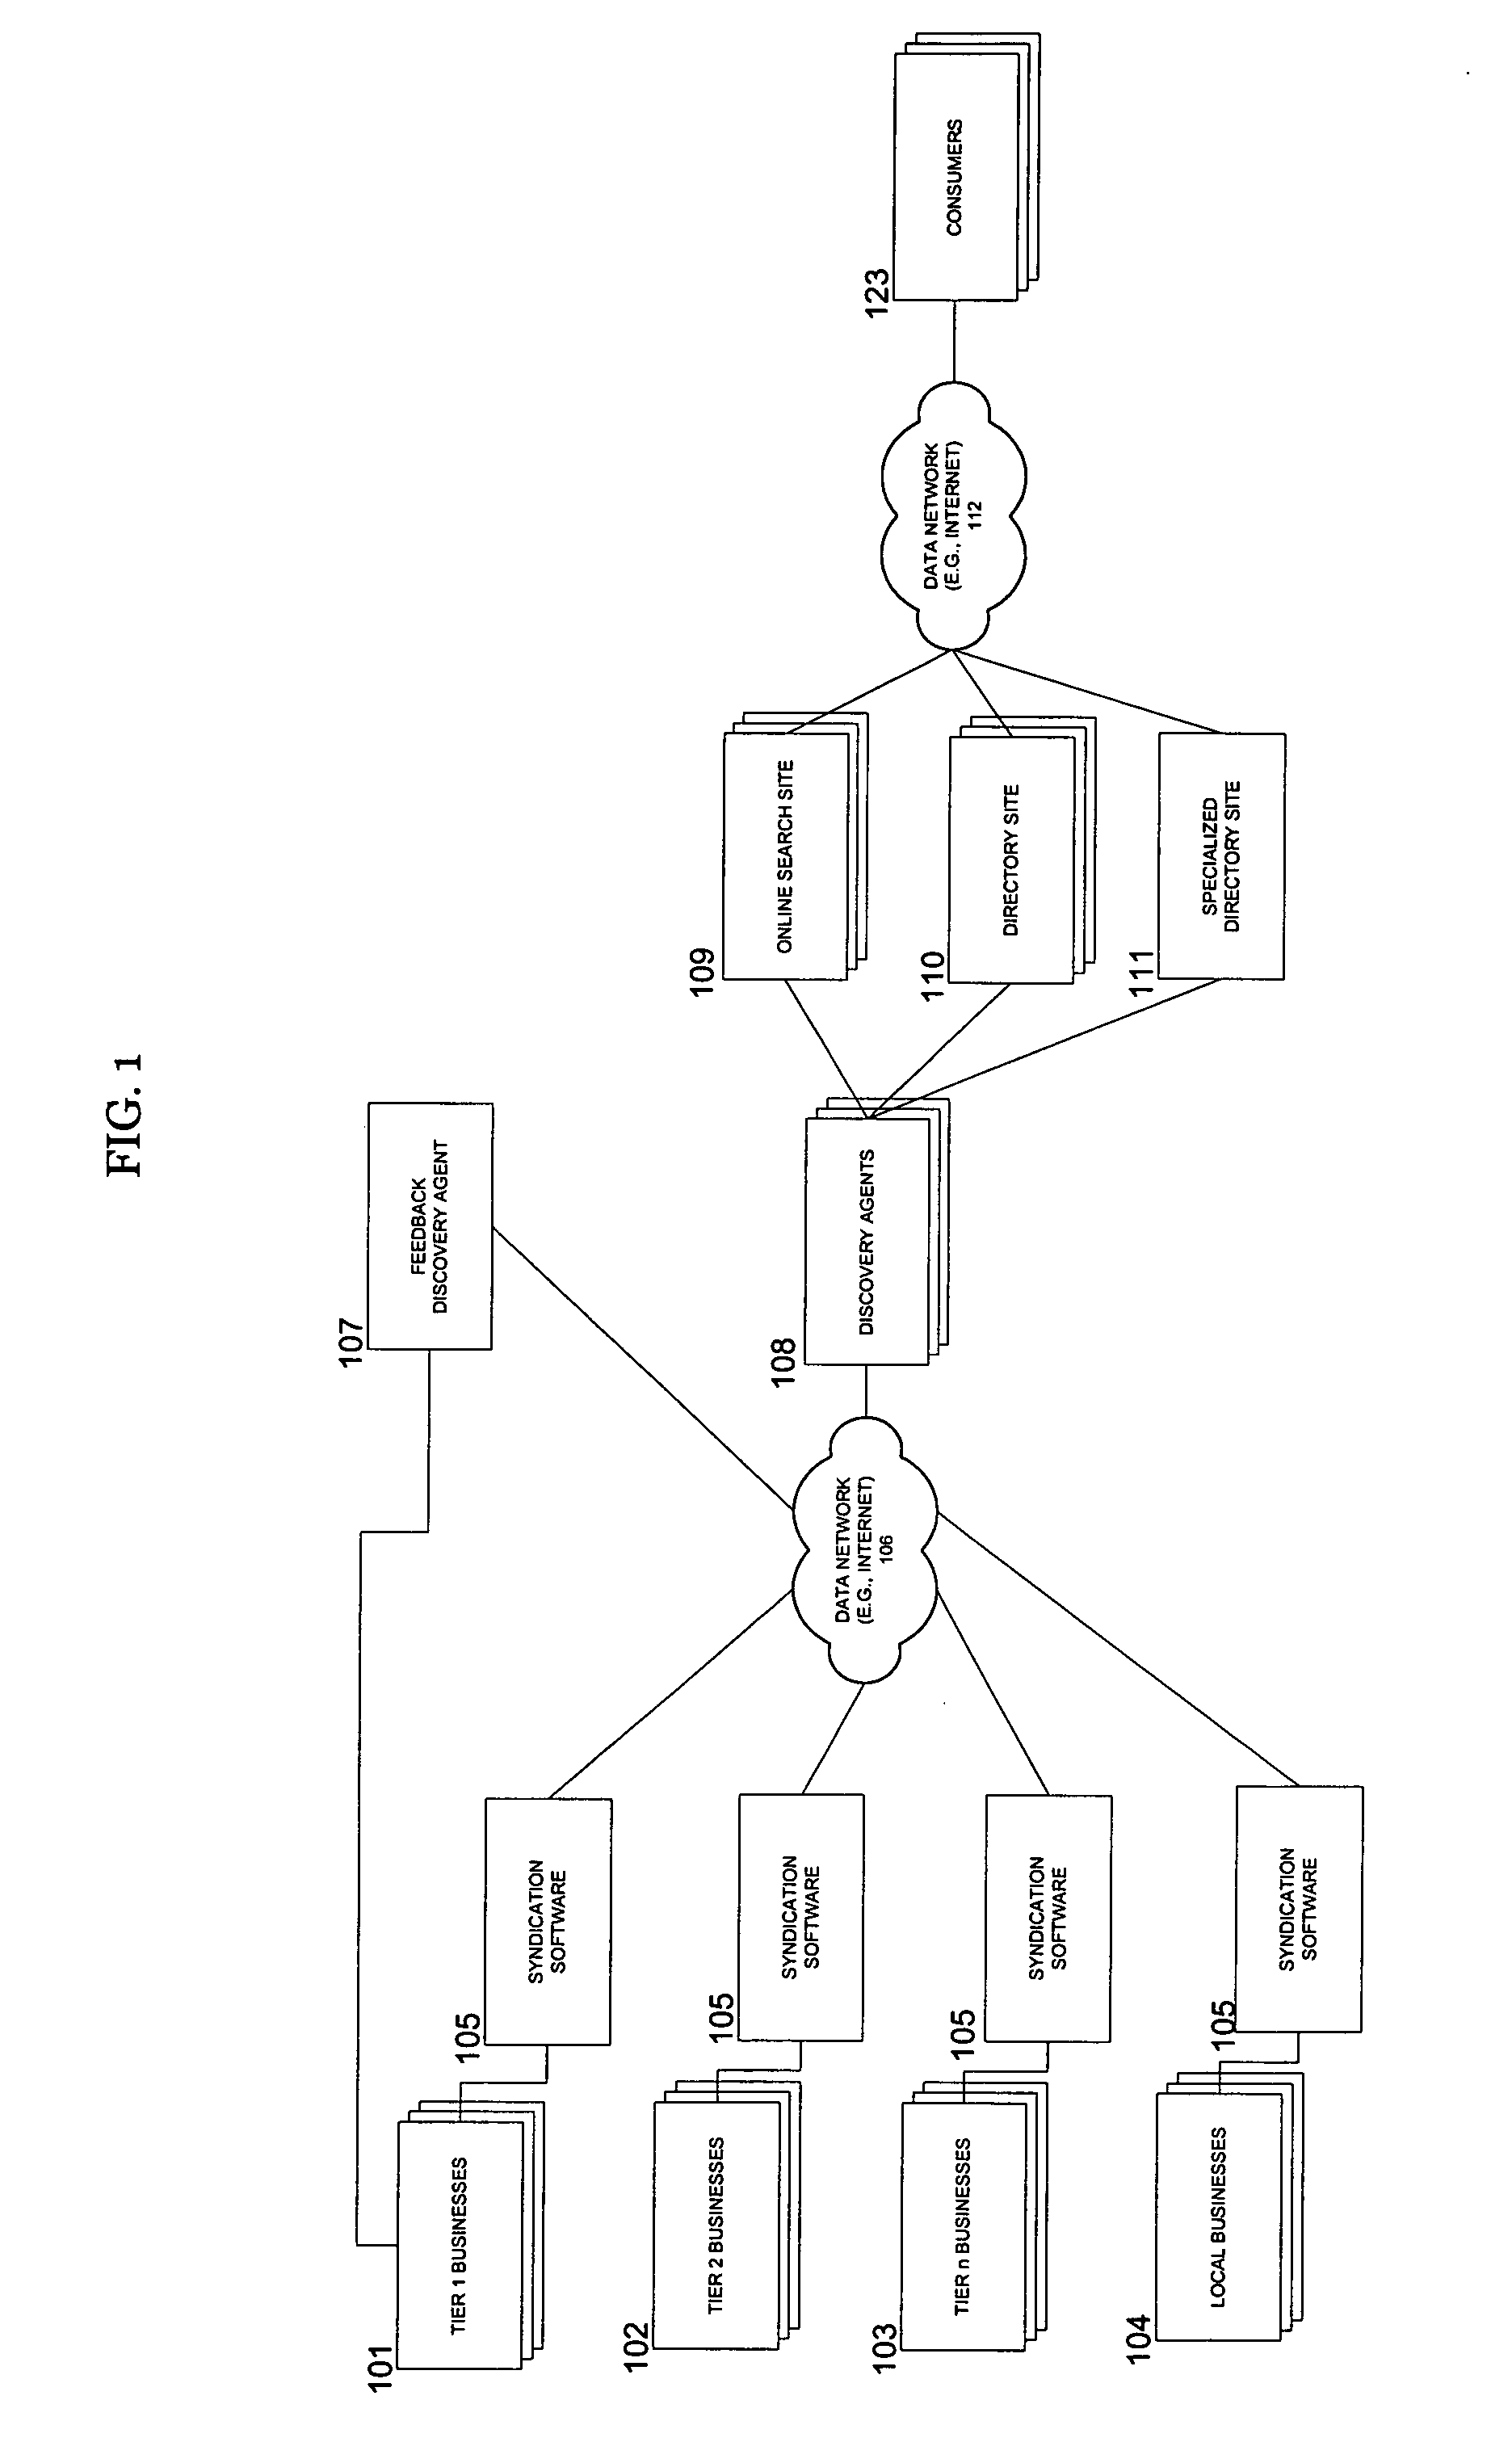 Method and system for syndicating business information for online search and directories